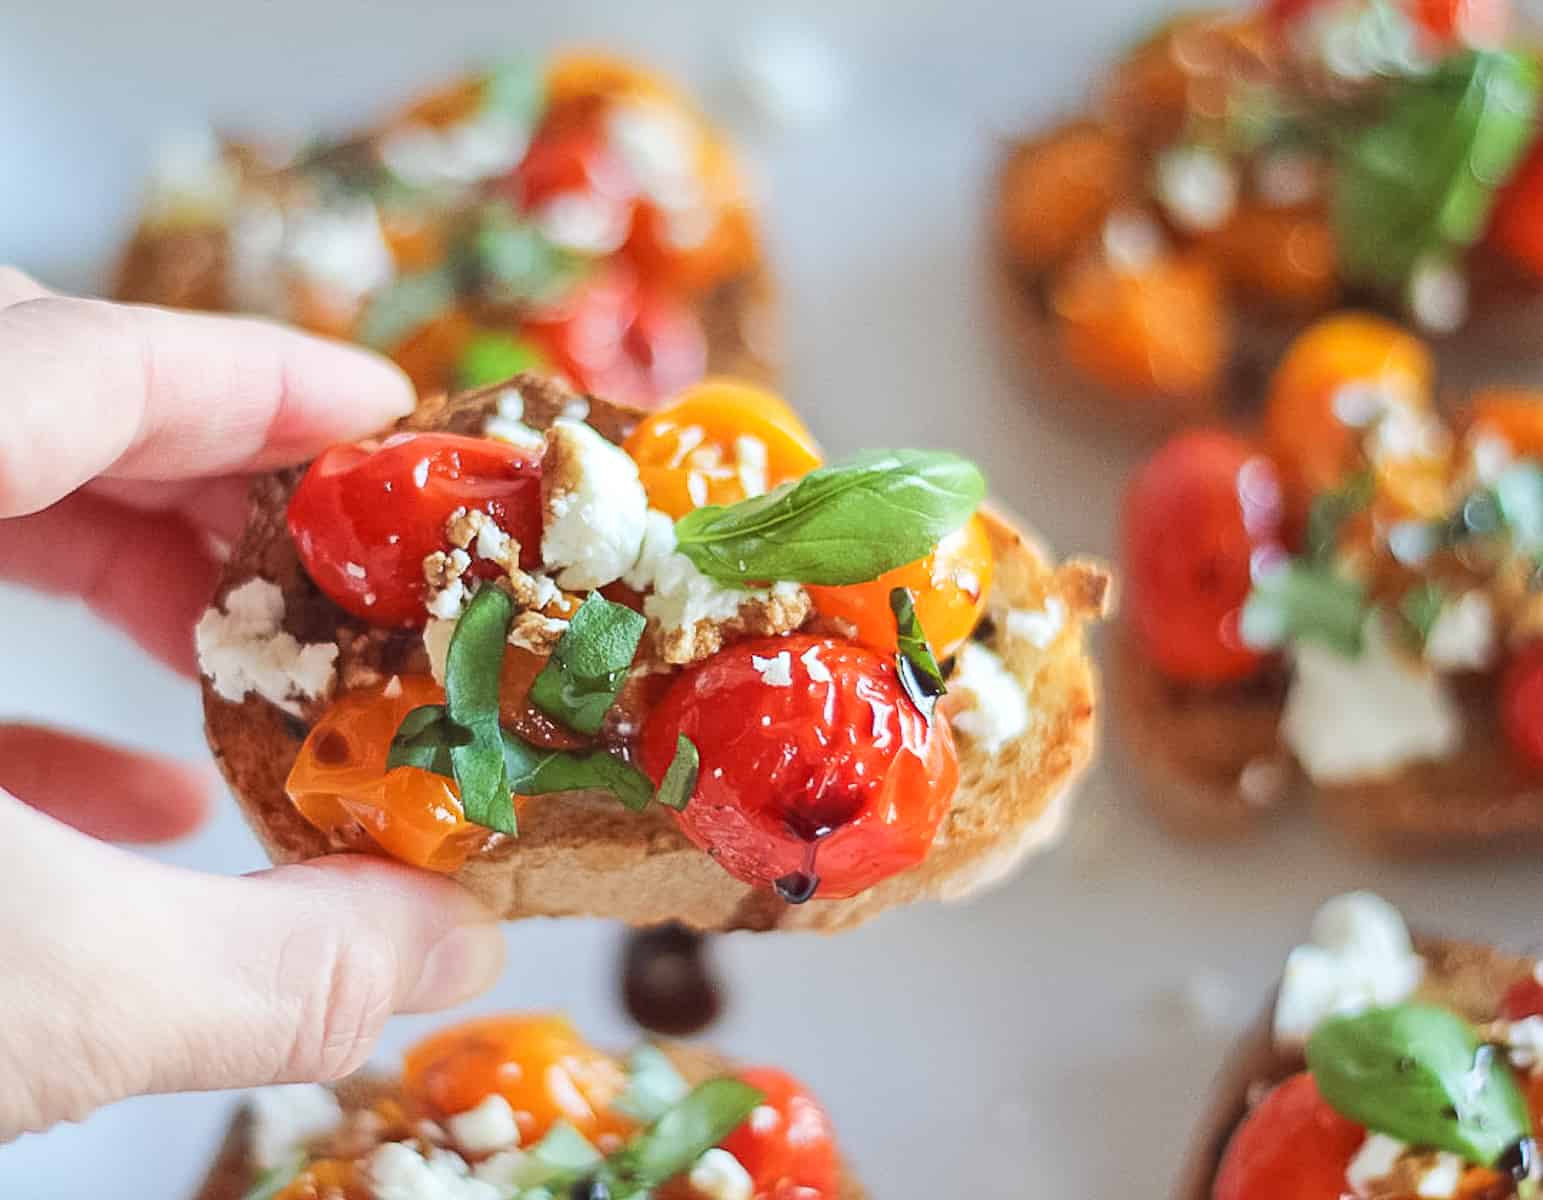 Hand picking up a cherry tomato, goat cheese, basil and balsamic appetizer.